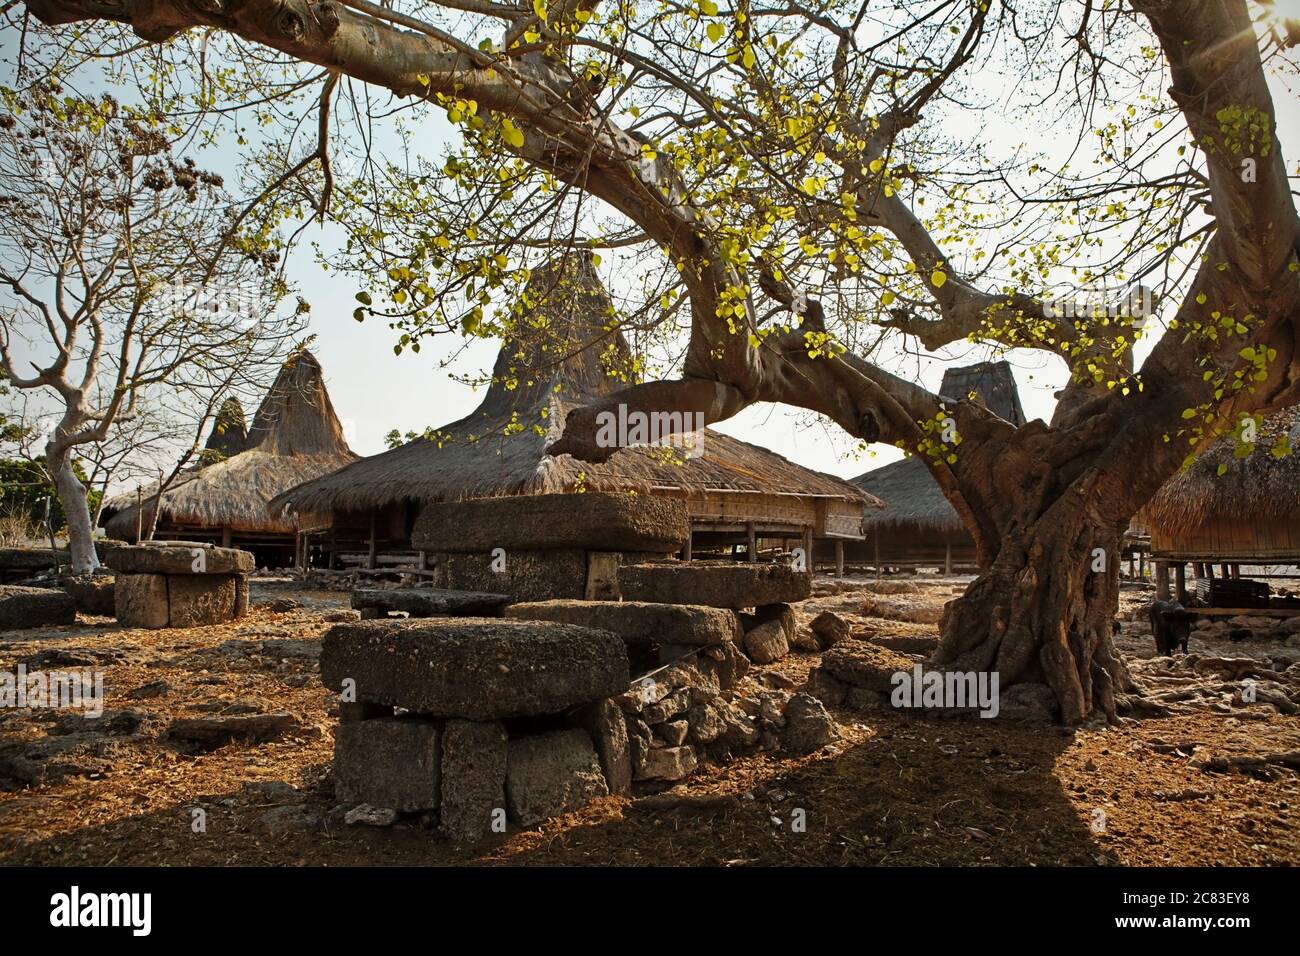 A dry season view of a traditional village packed with vernacular architectural style in Prailiang, Mondu, Kanatang, East Sumba, Indonesia. Stock Photo